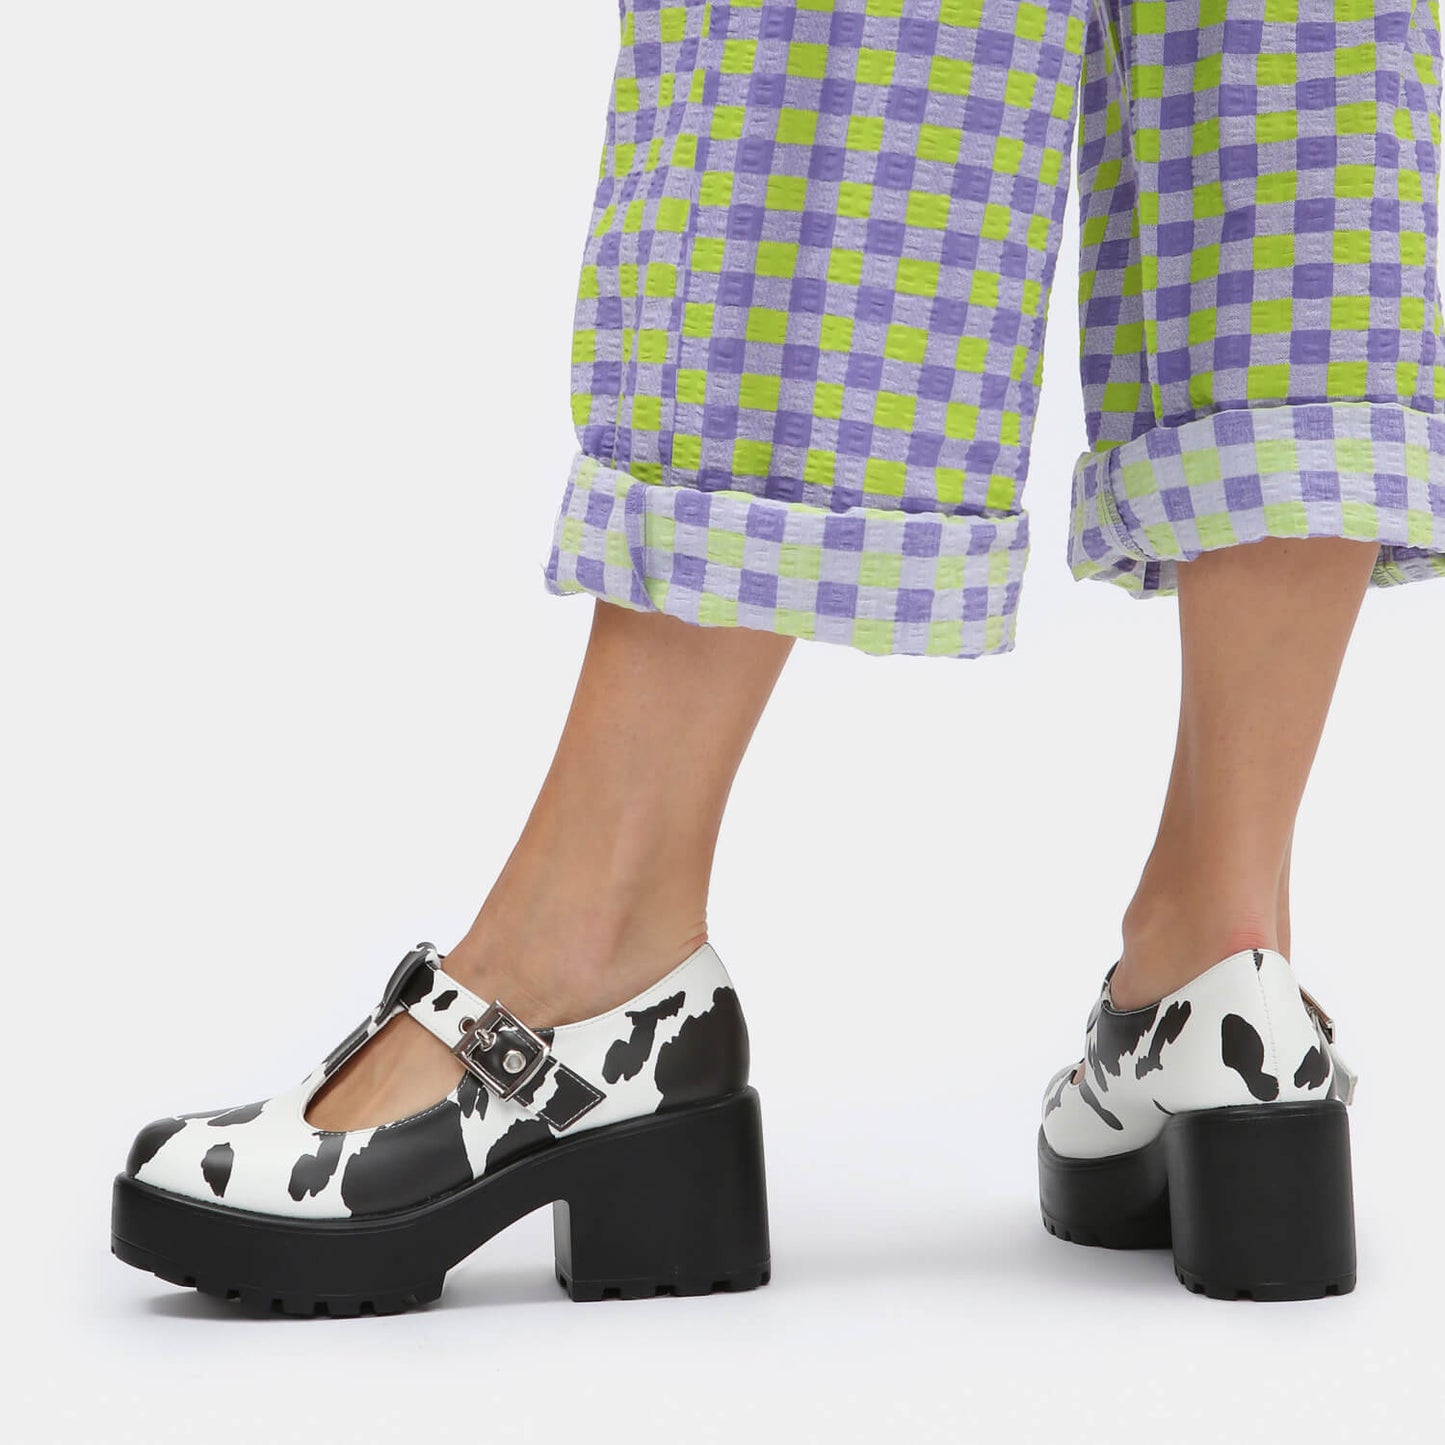 Sai Cow Print Mary Jane Shoes 'Nettie Edition' - Mary Janes - KOI Footwear - White - Model Left View